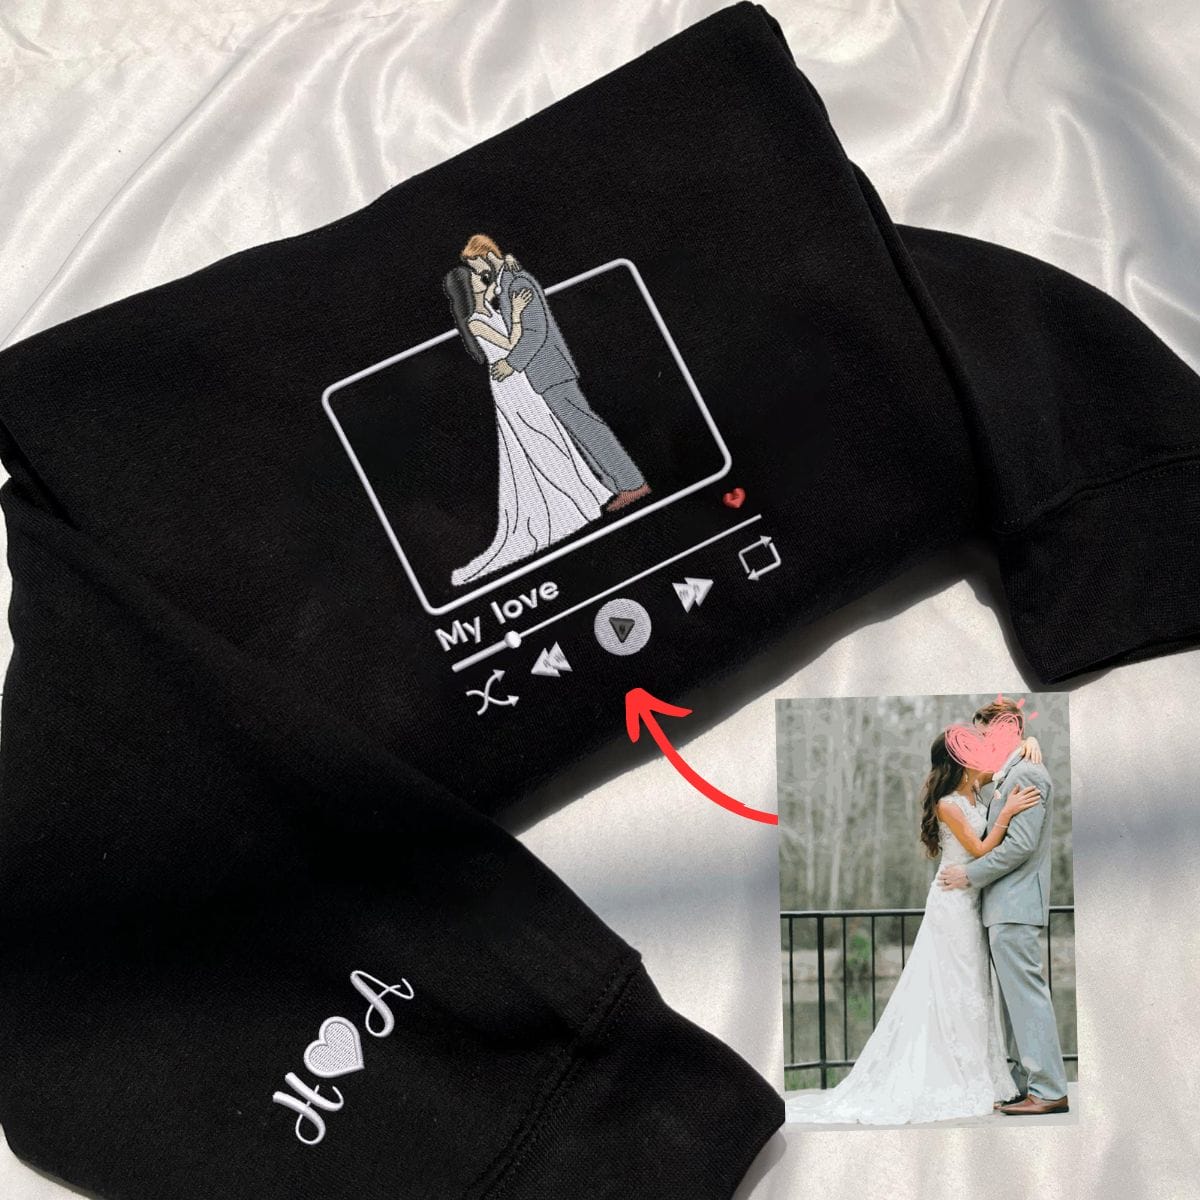 Gift for Newly Married Couple with Photo Portrait Sweatshirt Embroidered, Initial Heart on sleeve